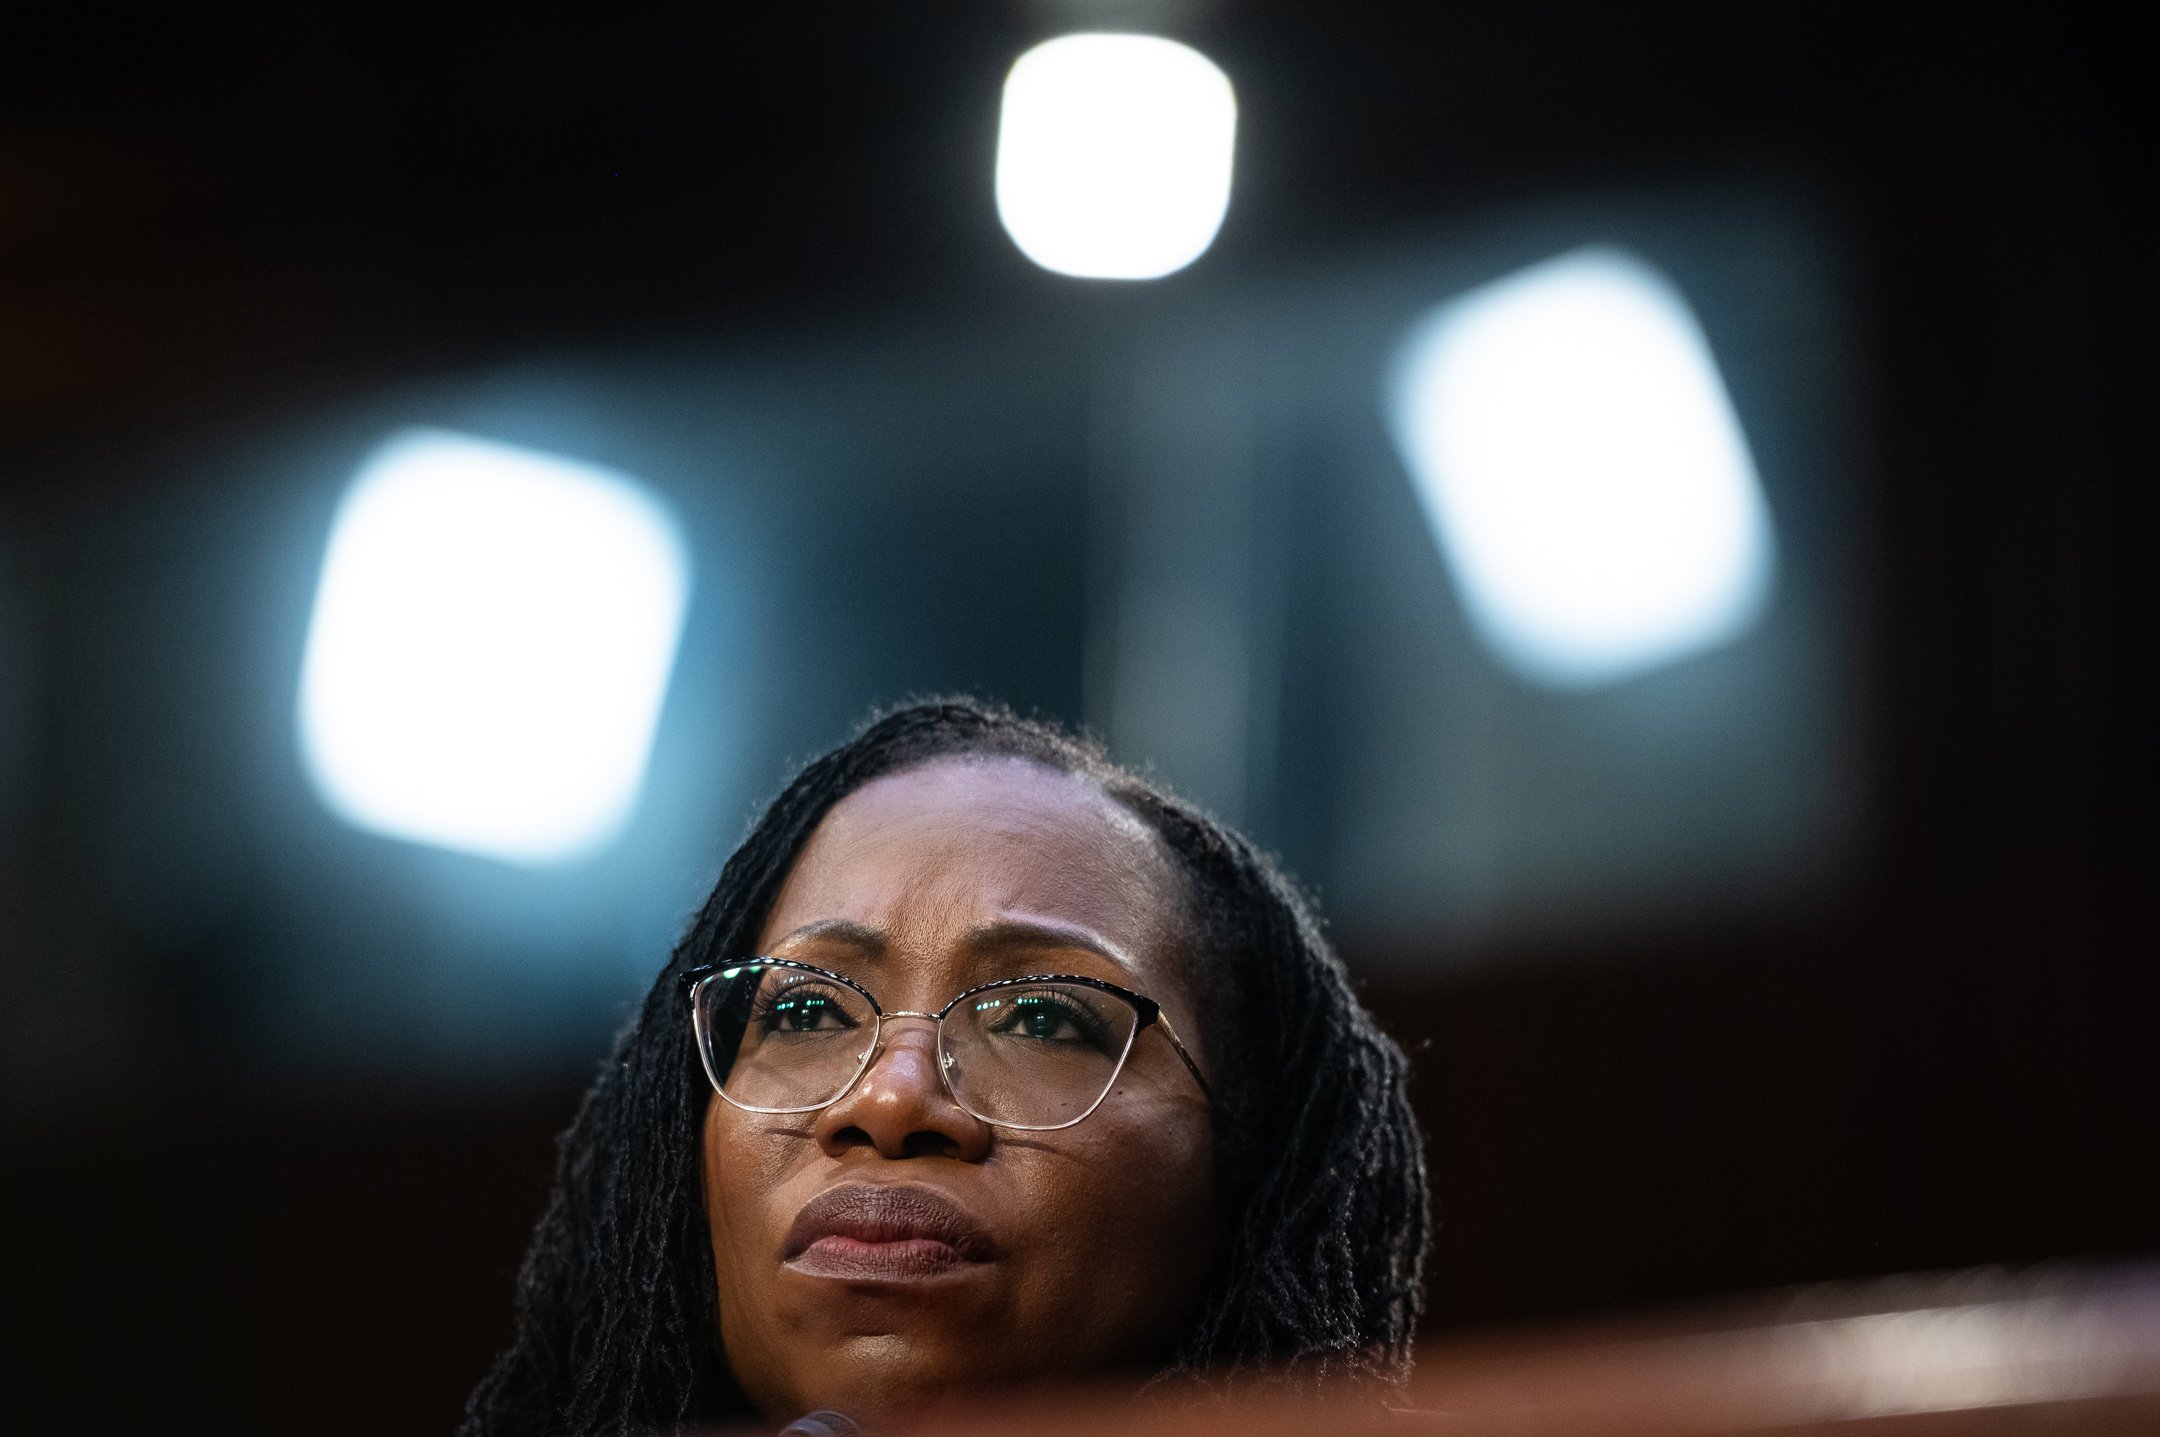  Supreme Court nominee Judge Ketanji Brown Jackson testifies during Senate Judiciary Committee confirmation hearings for her nomination to the Supreme Court, at the U.S. Capitol, in Washington, D.C., on March 22, 2022. (Graeme Sloan for Sipa USA) 